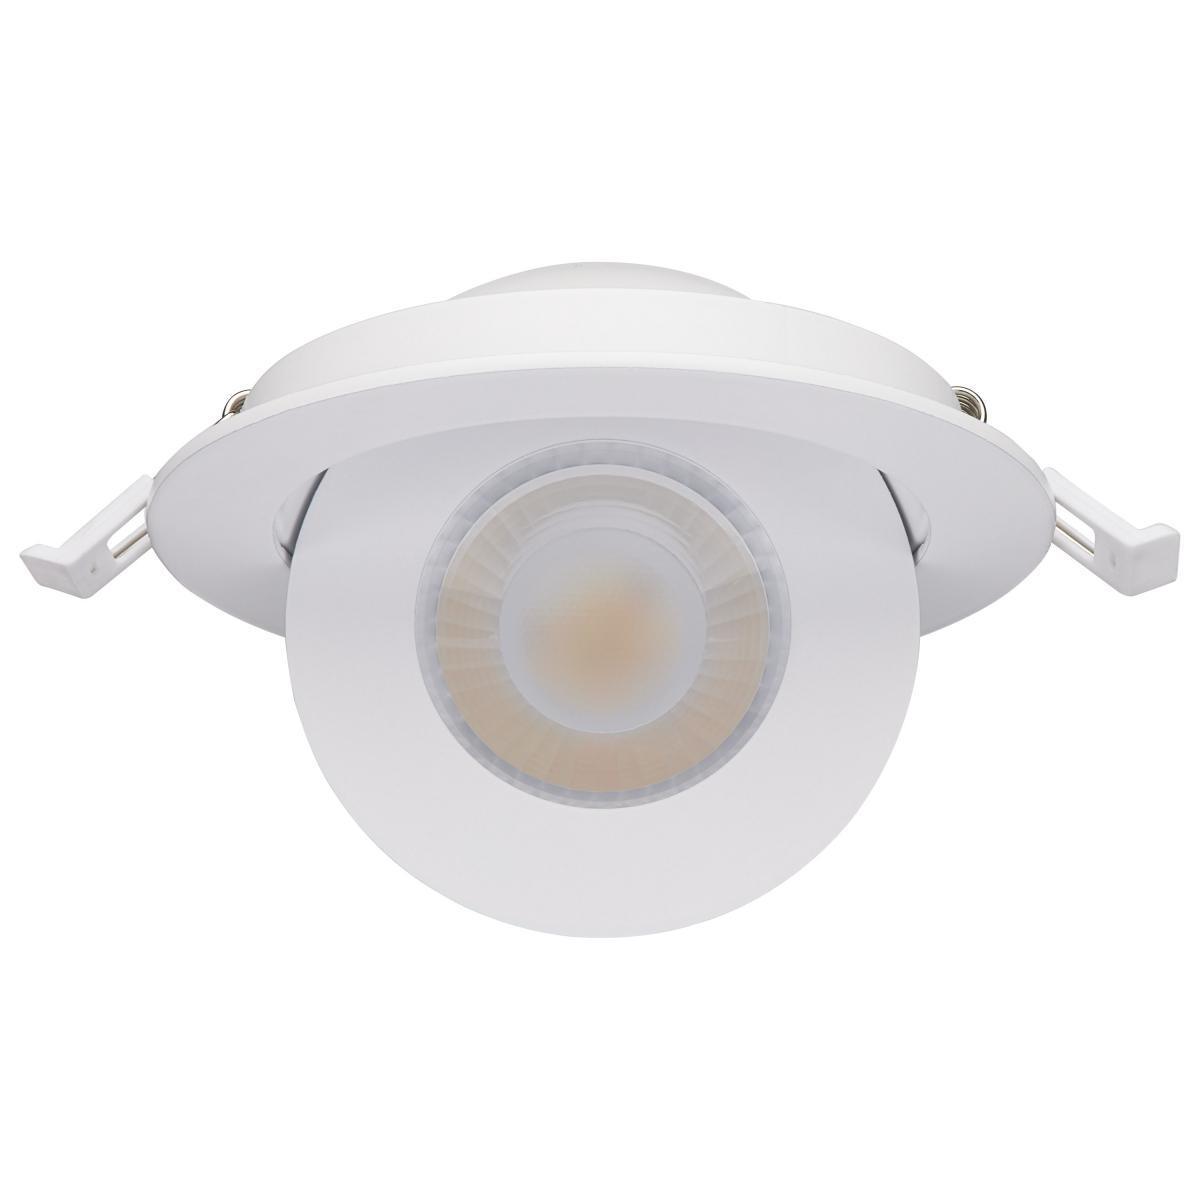 4 Inch Round Gimbal Downlight with Remote Driver, 9 Watt, 750 Lumens, Selectable CCT, 2700K to 5000K, Remote Driver, White Finish